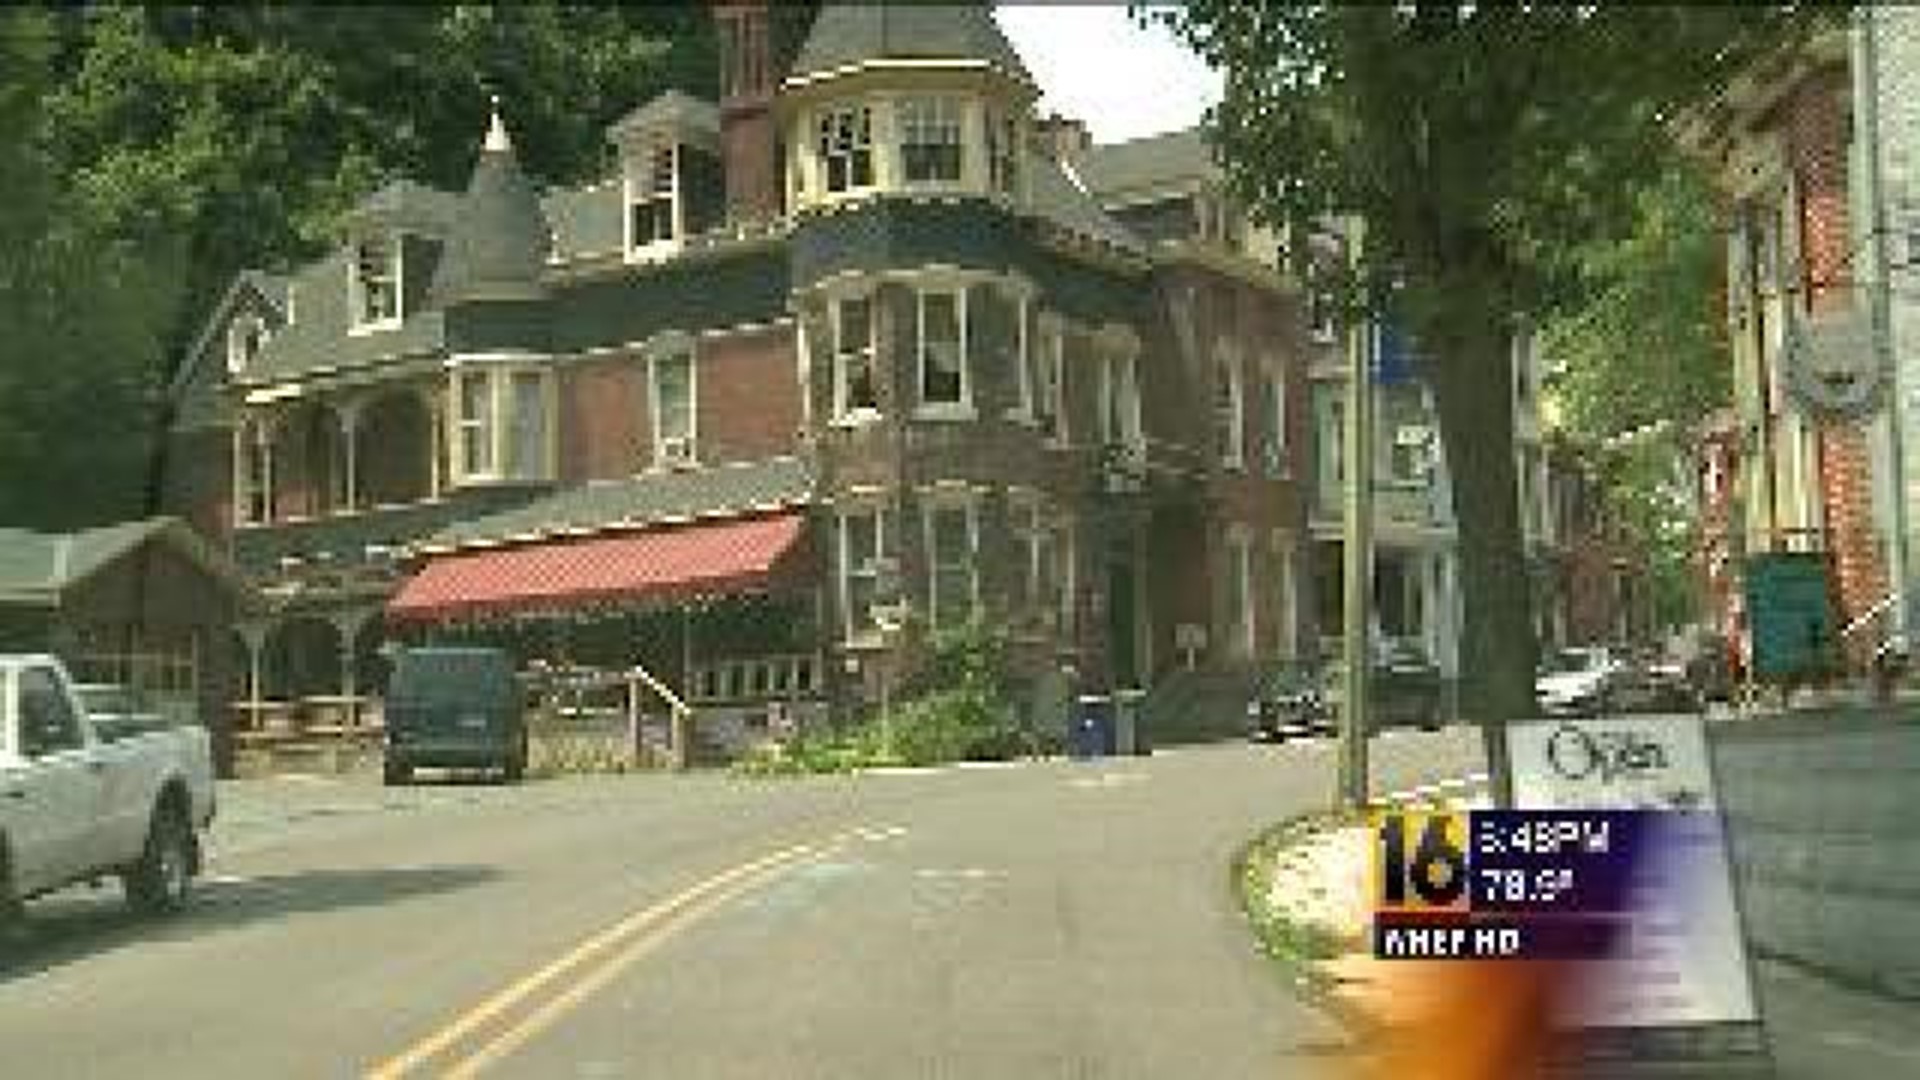 Jim Thorpe Named Fourth Most Beautiful Town